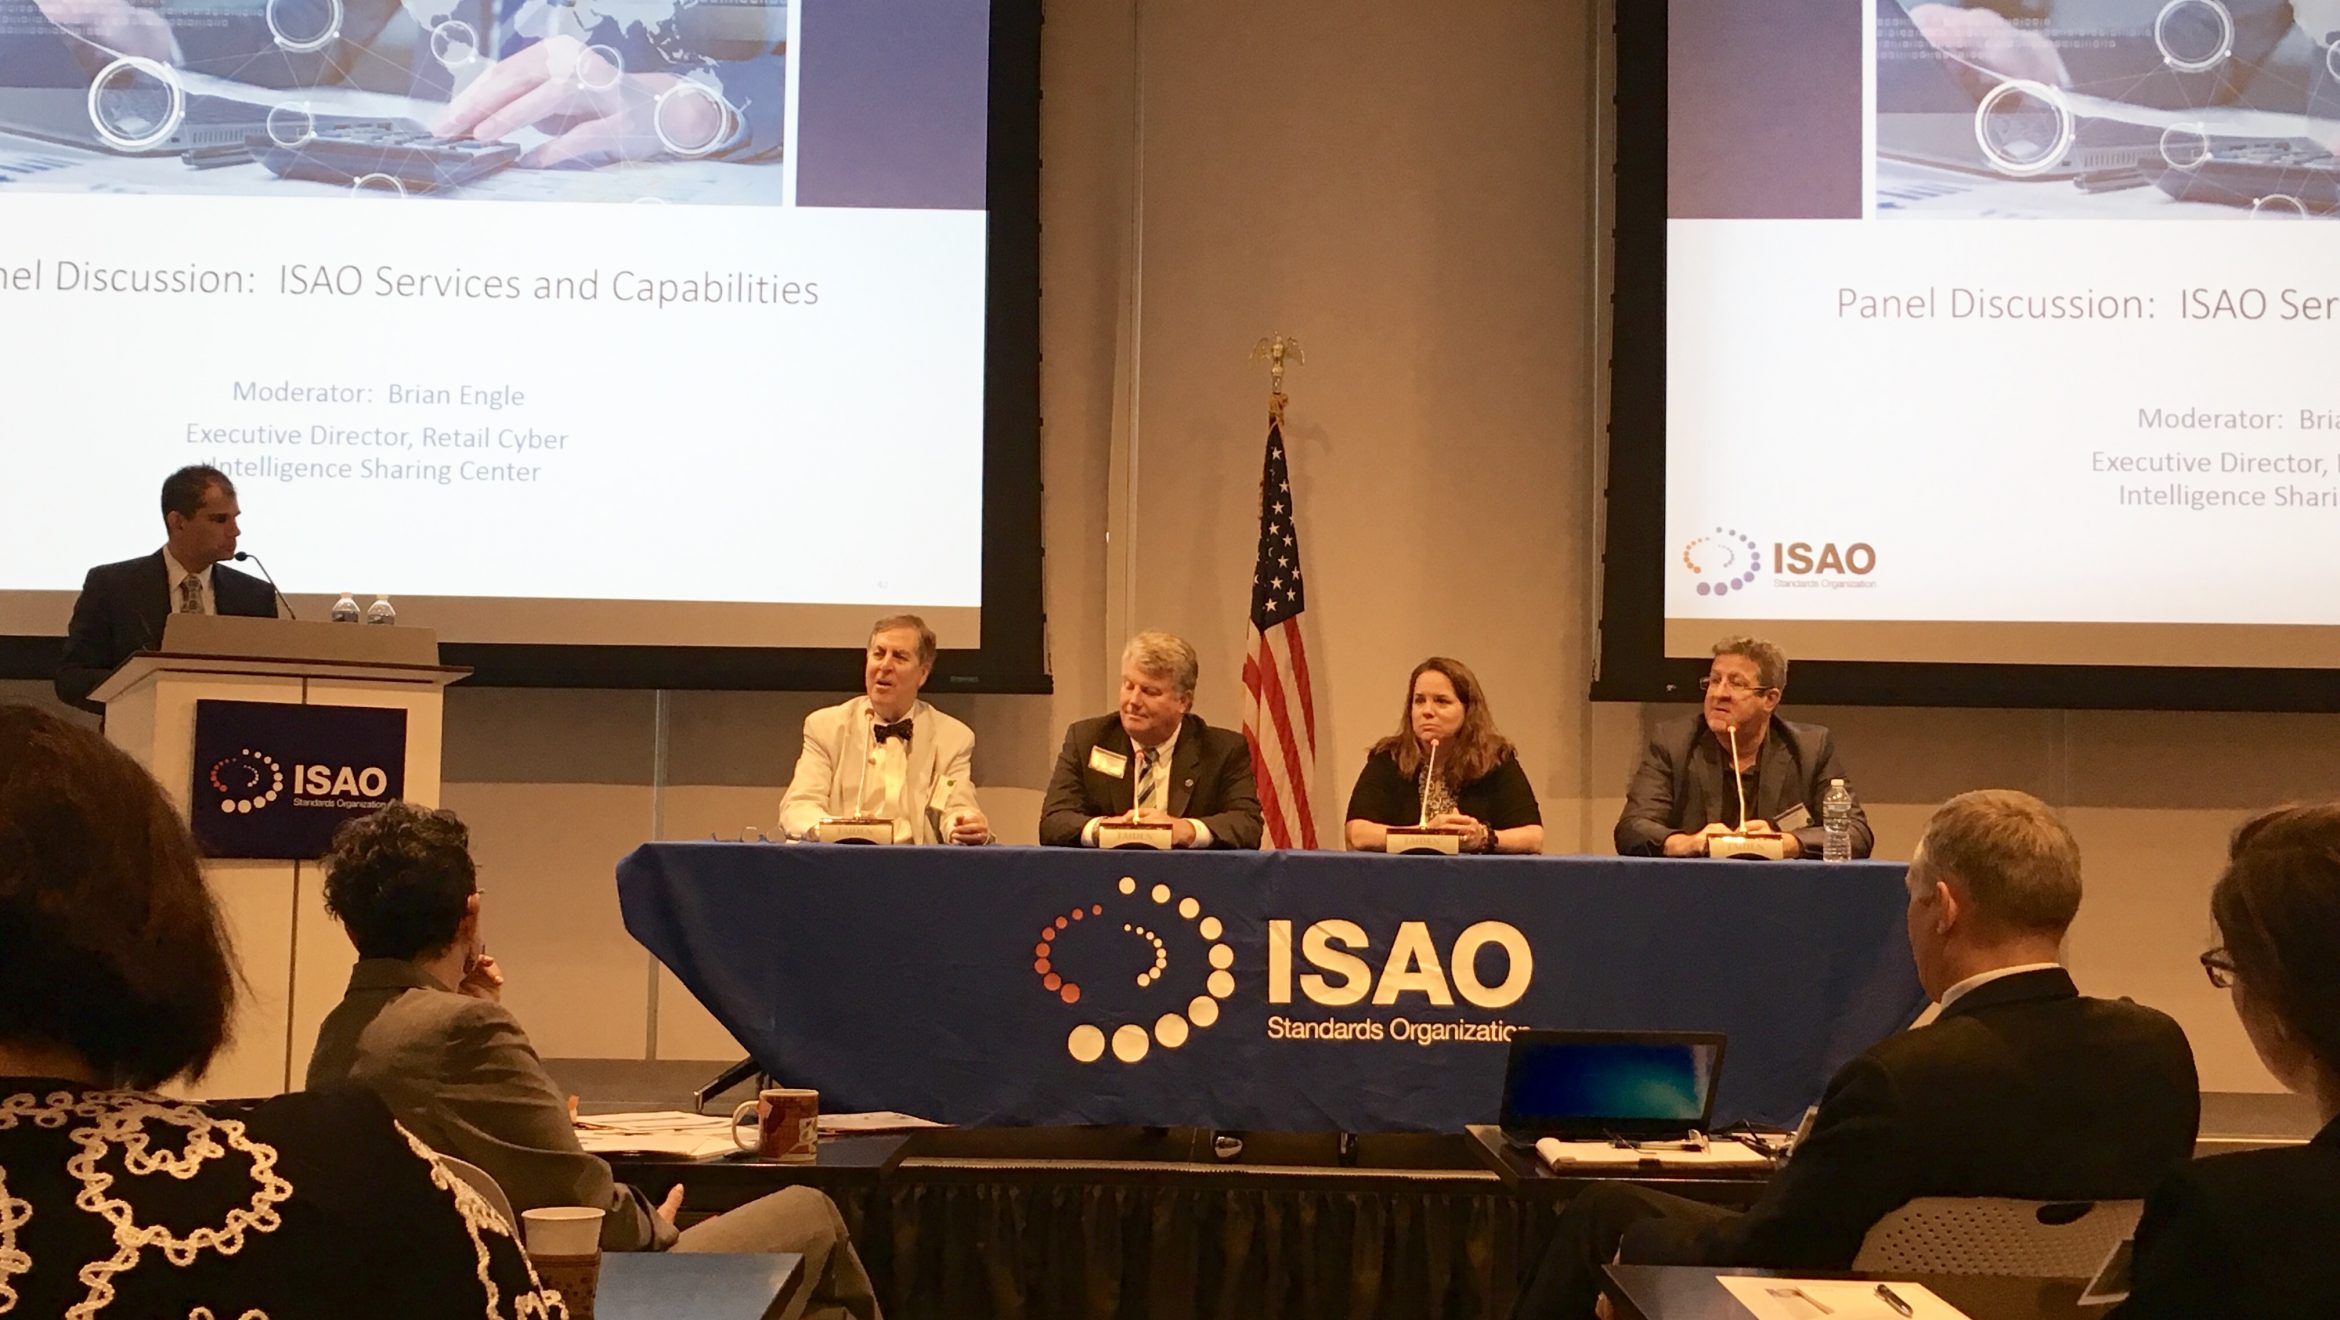 ISAO Standards Organization Hosts Over 100 Attendees at Fourth Public Forum